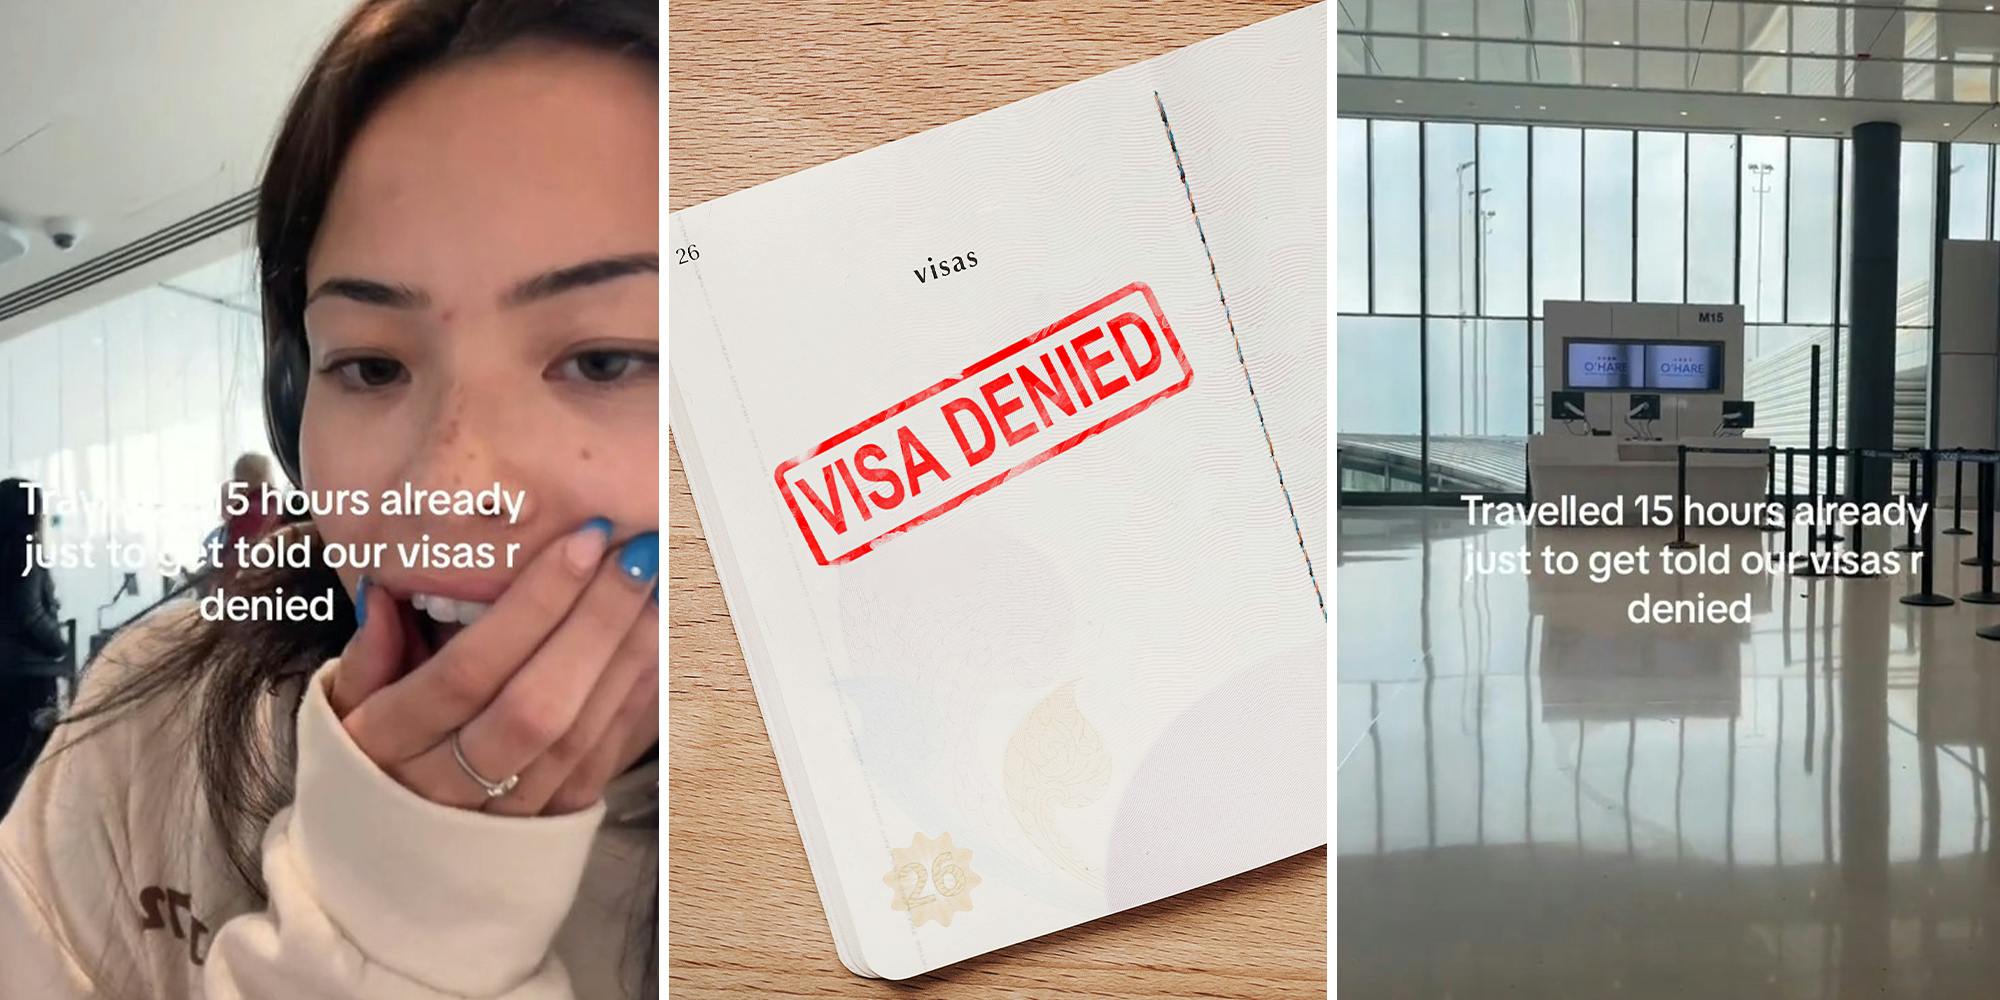 Passenger travels 15 hours, only to be denied entry at the airport. She can't believe why